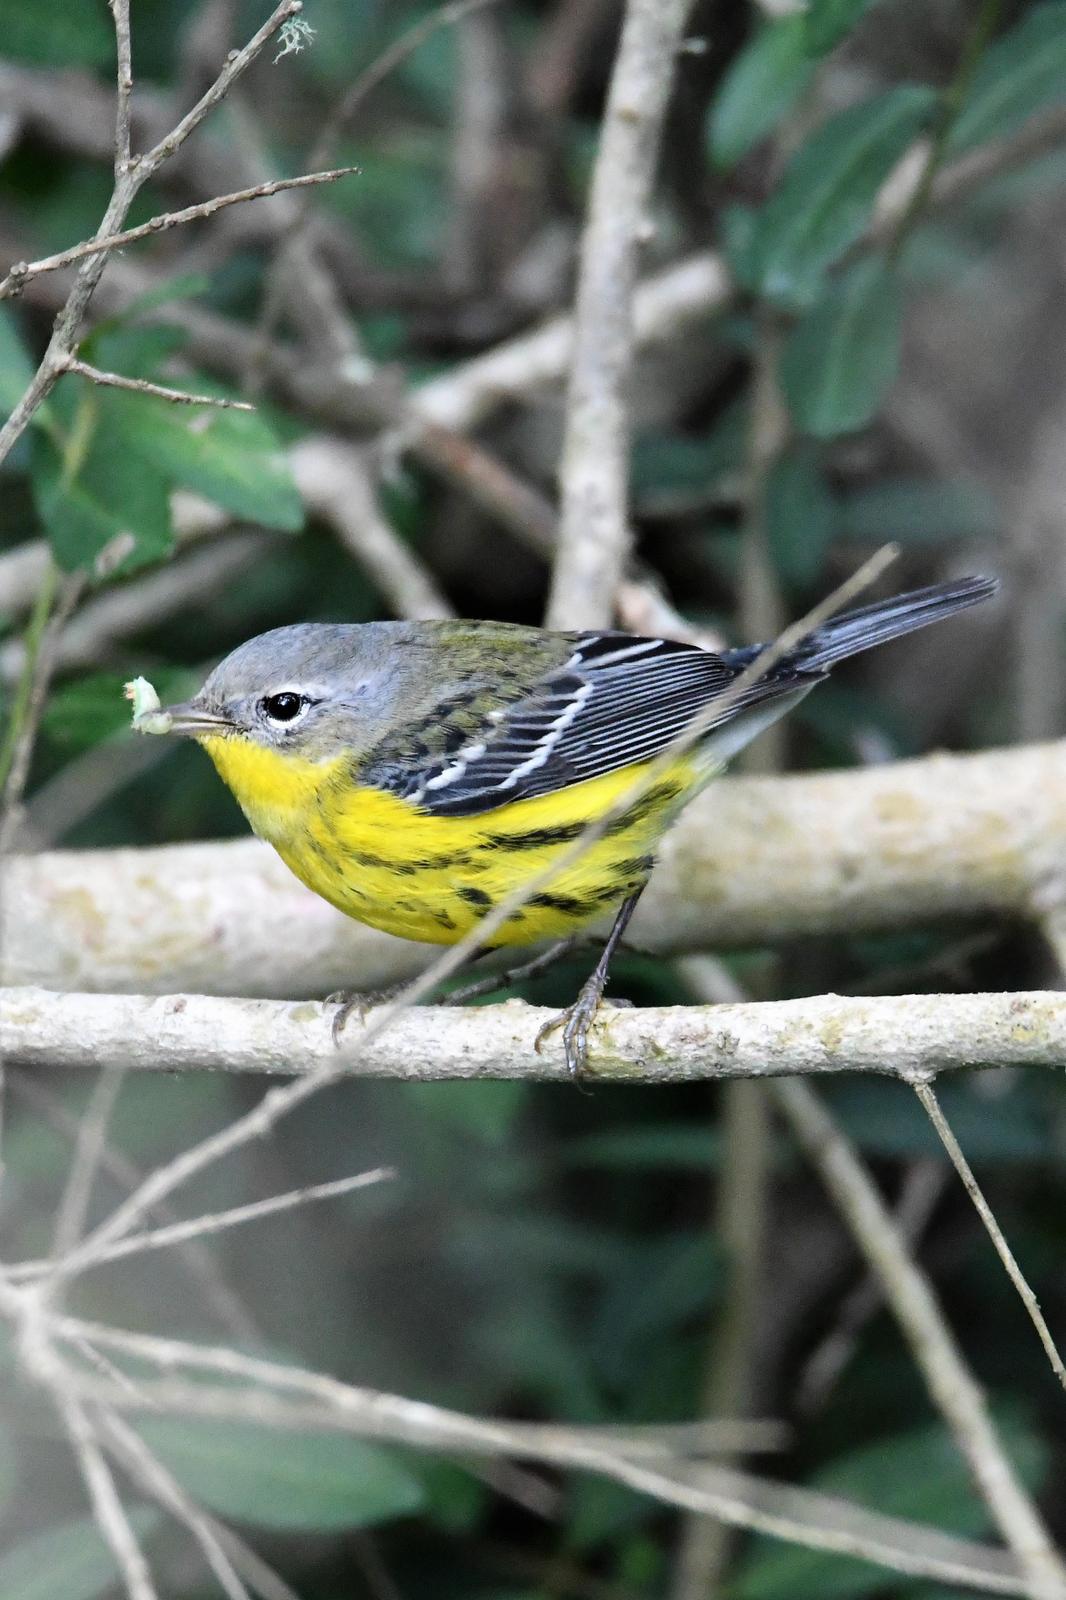 Magnolia Warbler Photo by Jerry Chen